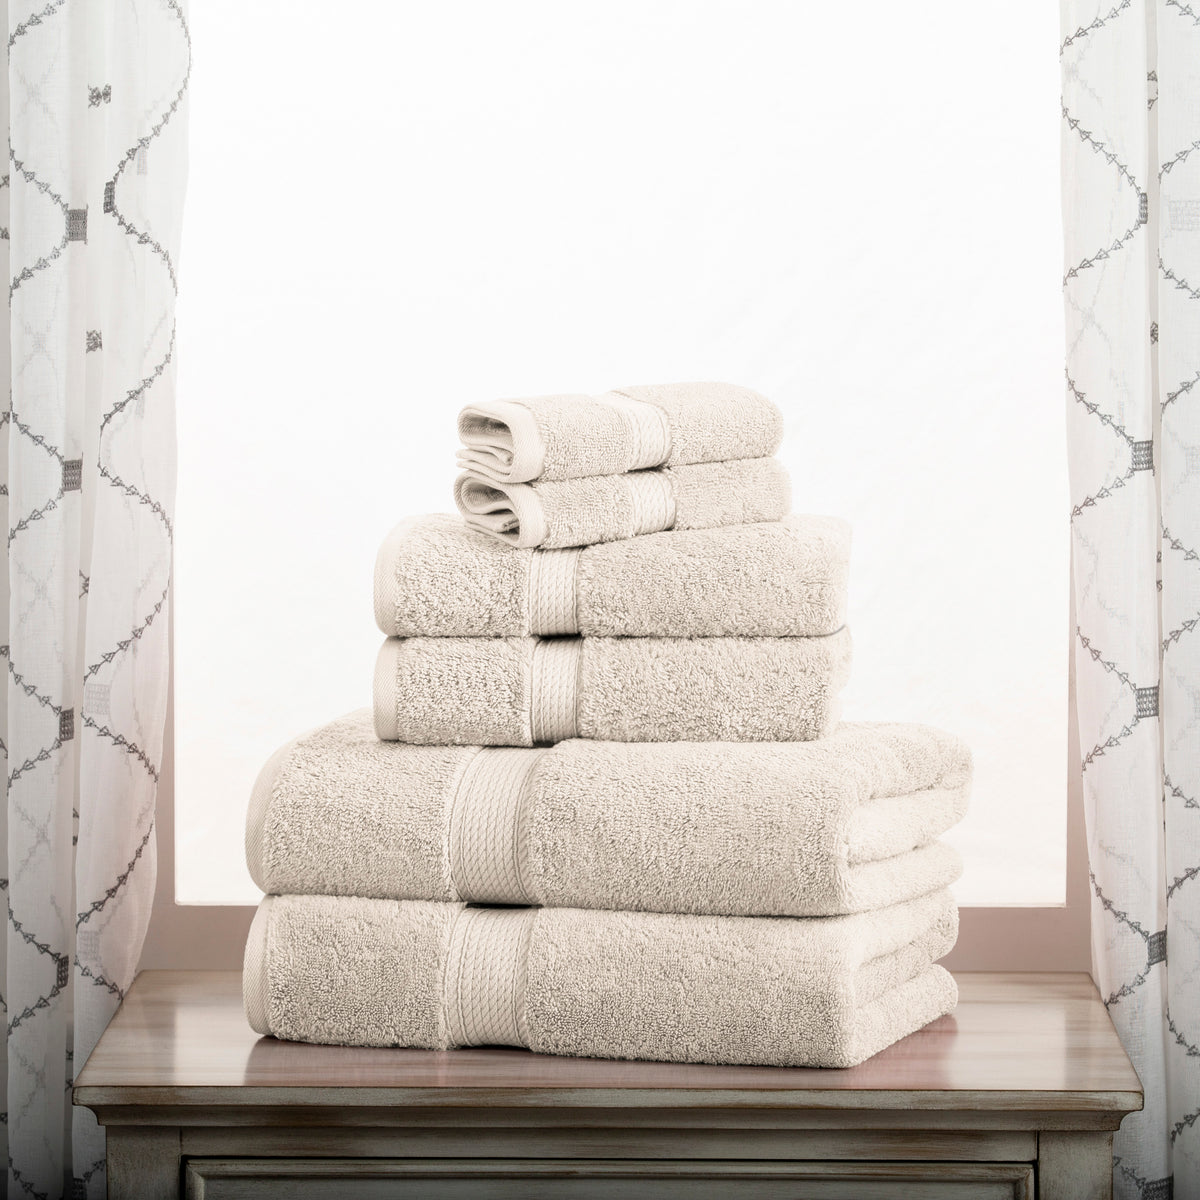 100% Egyptian cotton Towel set bath towel and face towel can